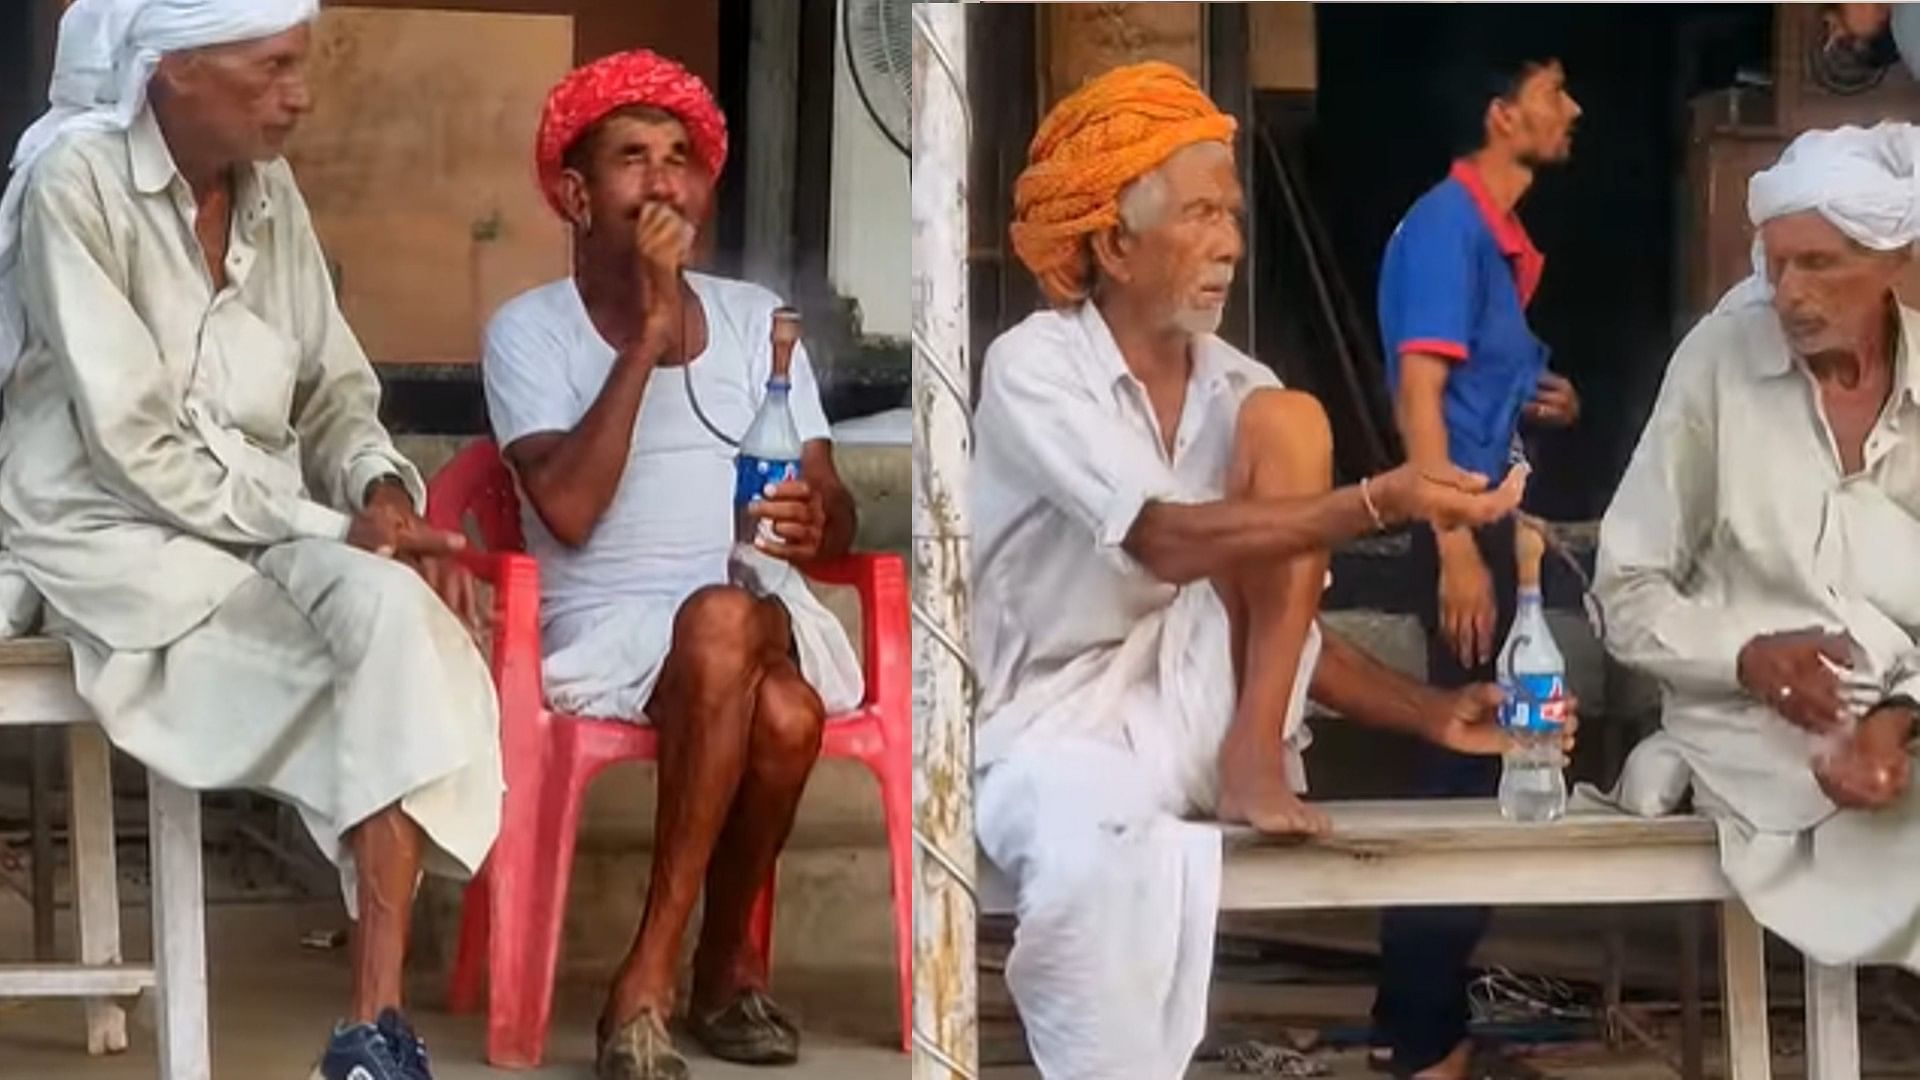 Desi jugaad: Hookah made from a bottle of cold drink jugaad of the elderly went viral